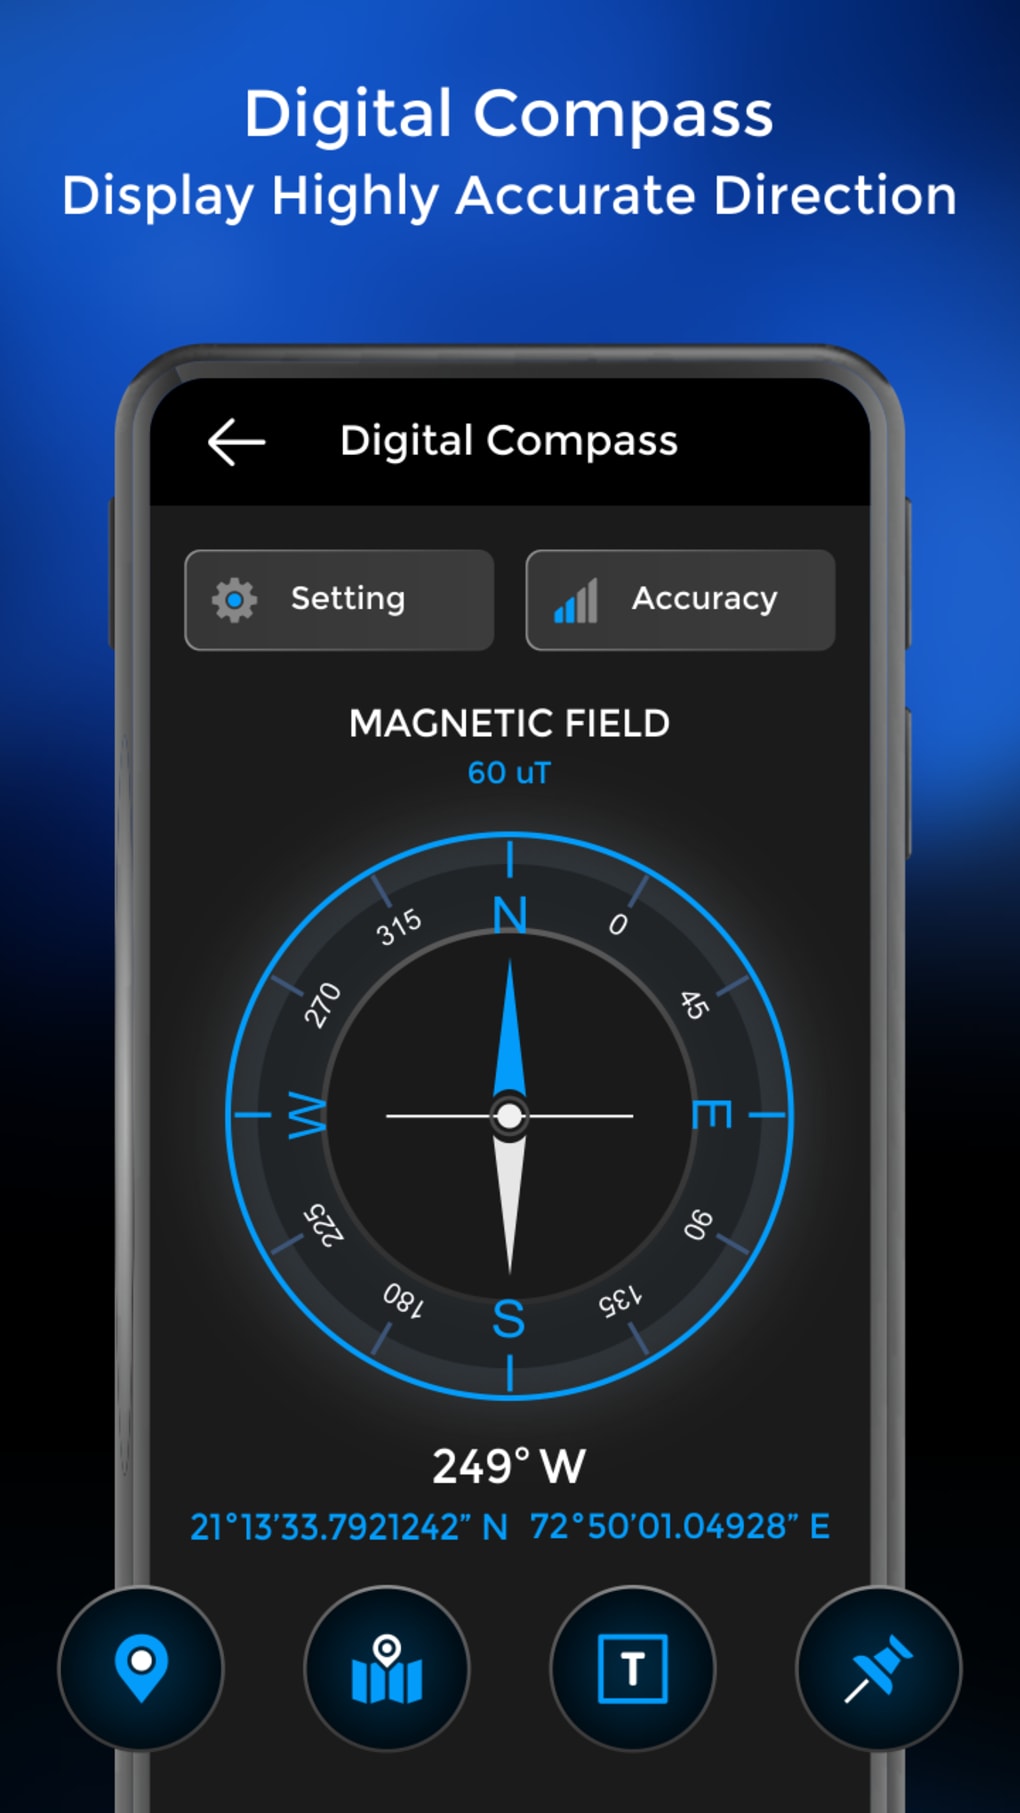 Smart Compass for Android - Digital Compass (Android) - Download